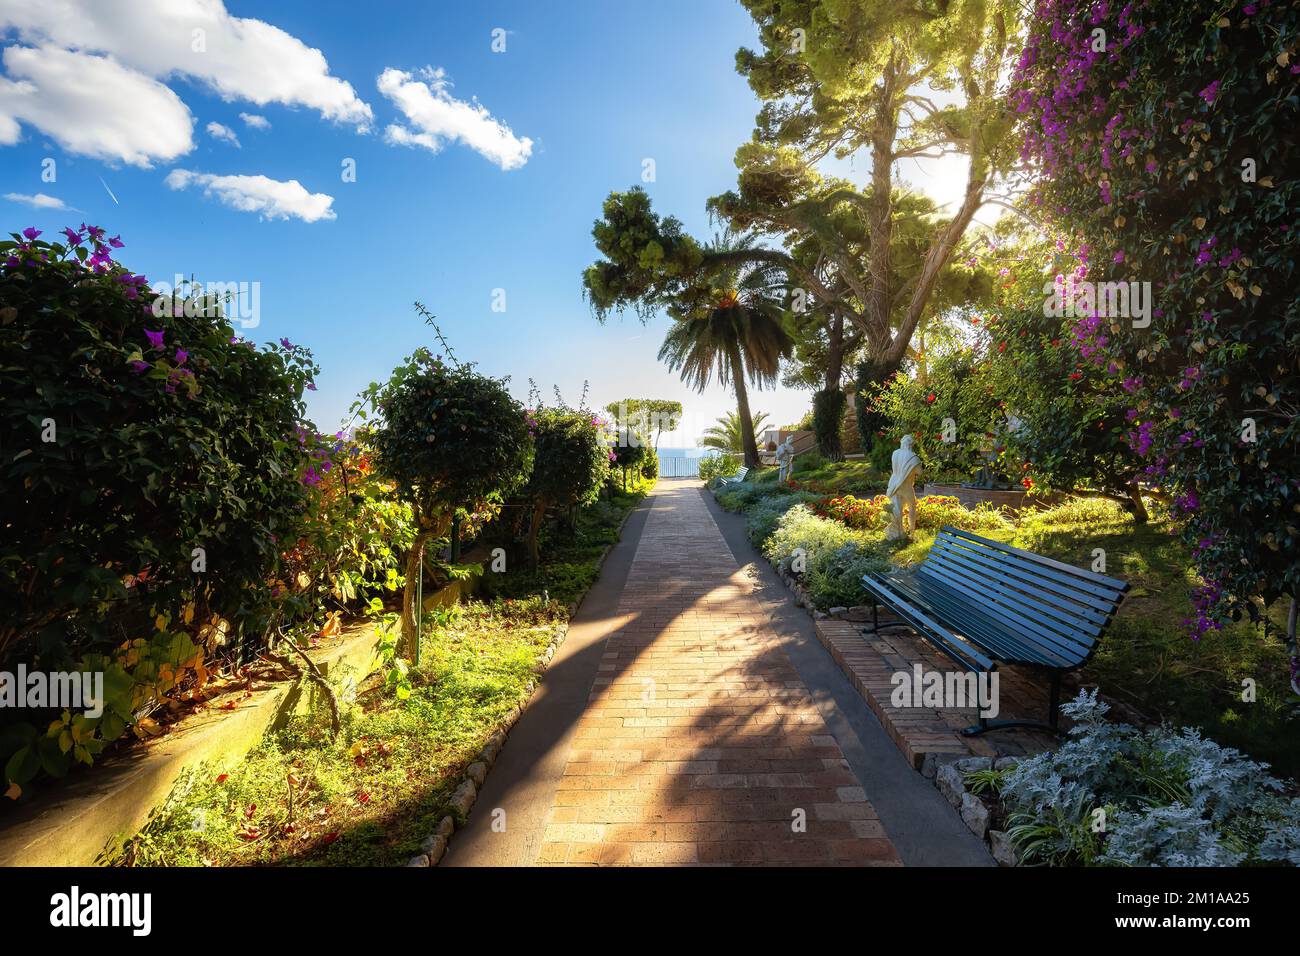 Path in a Garden with trees and flowers. Capri Island, Italy. Stock Photo